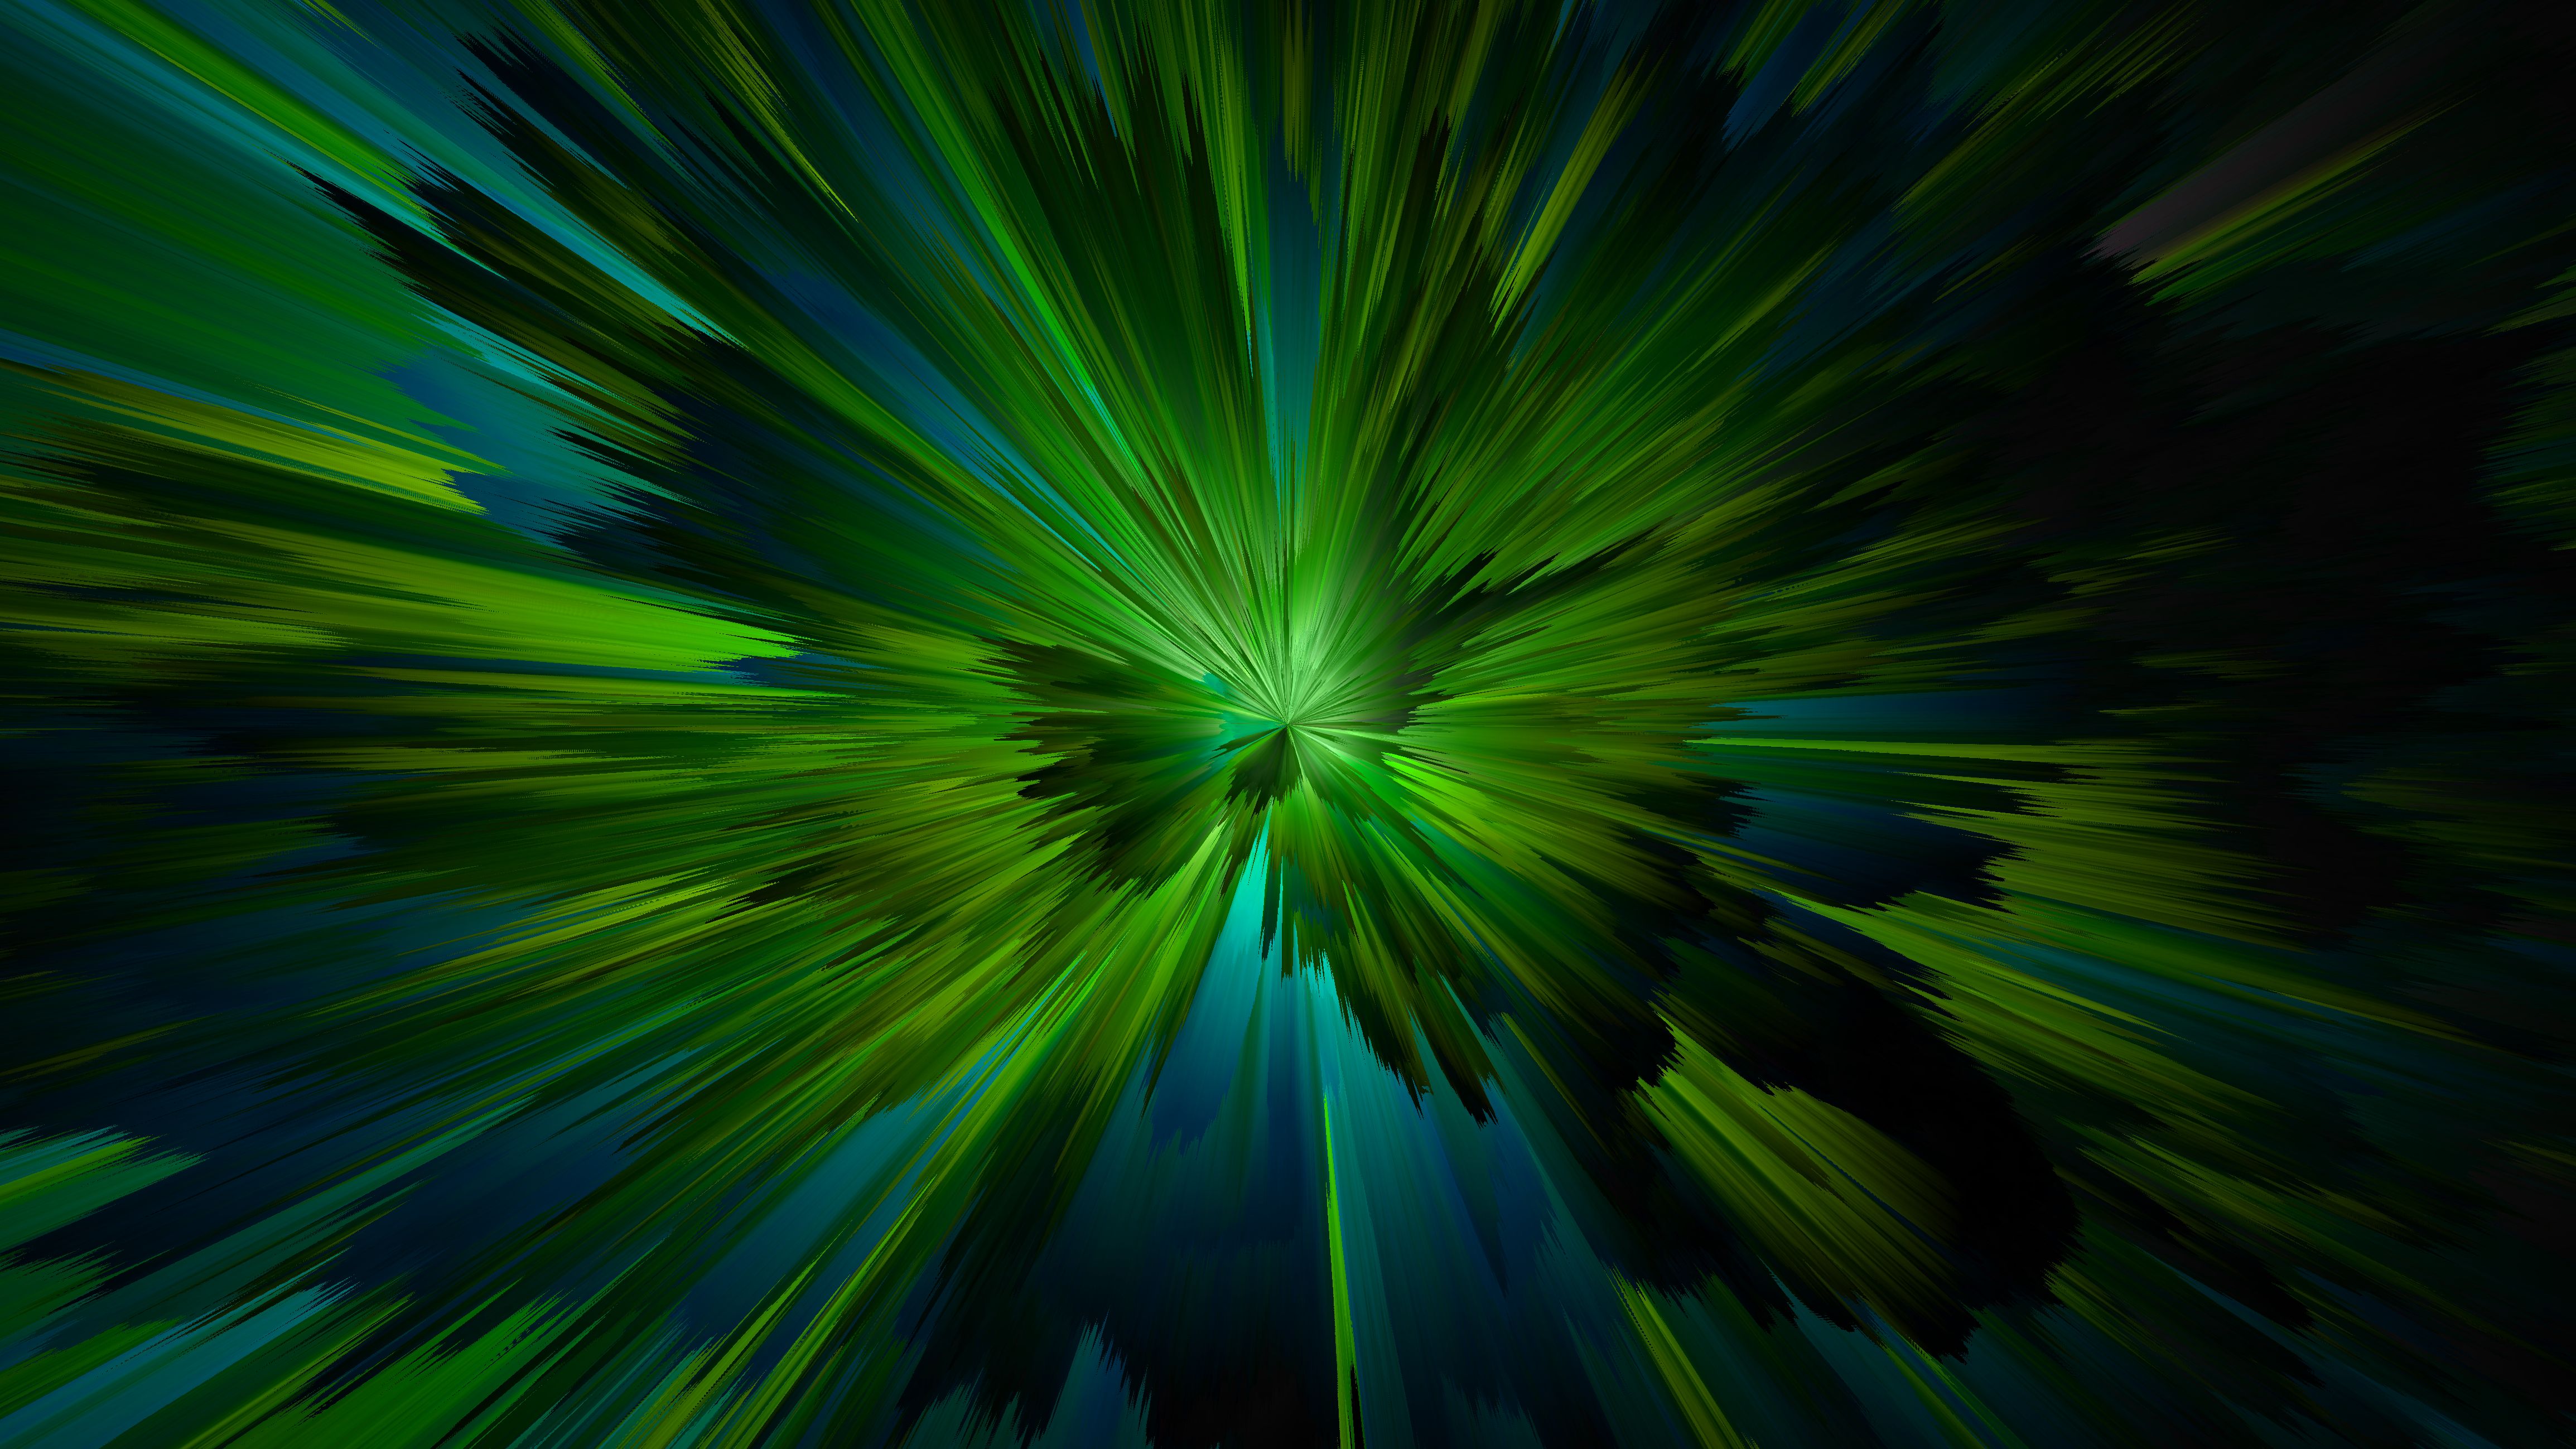 beams, streaks, abstract, green, rays, lines, stripes 1080p